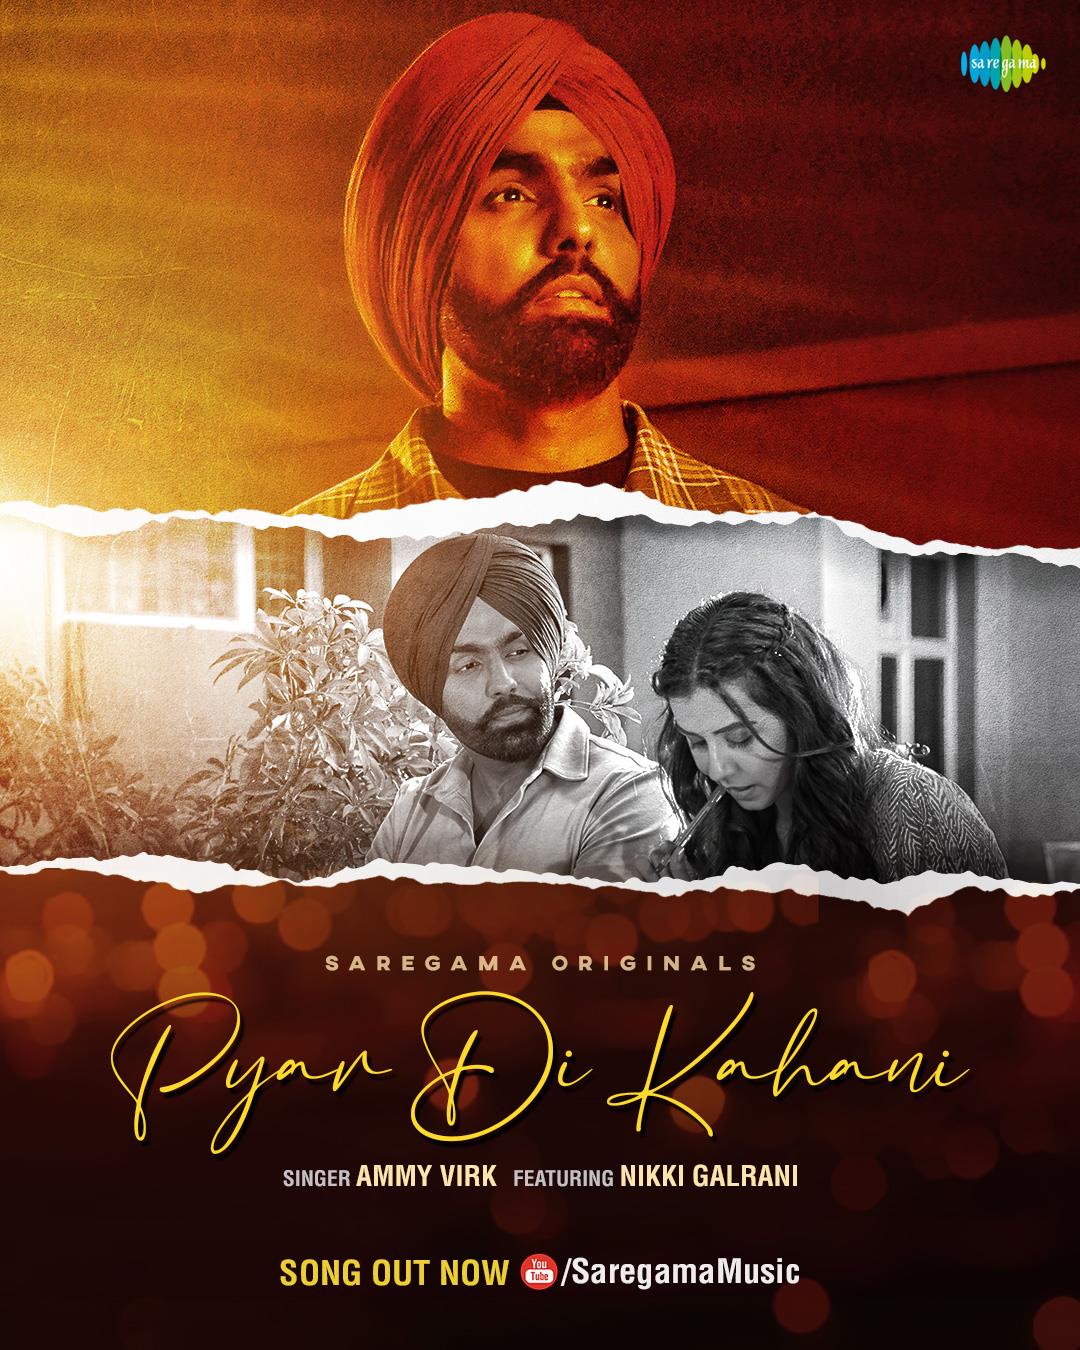 Ammy Virk's new single 'Pyar Di Kahani' releases today. Watch it here